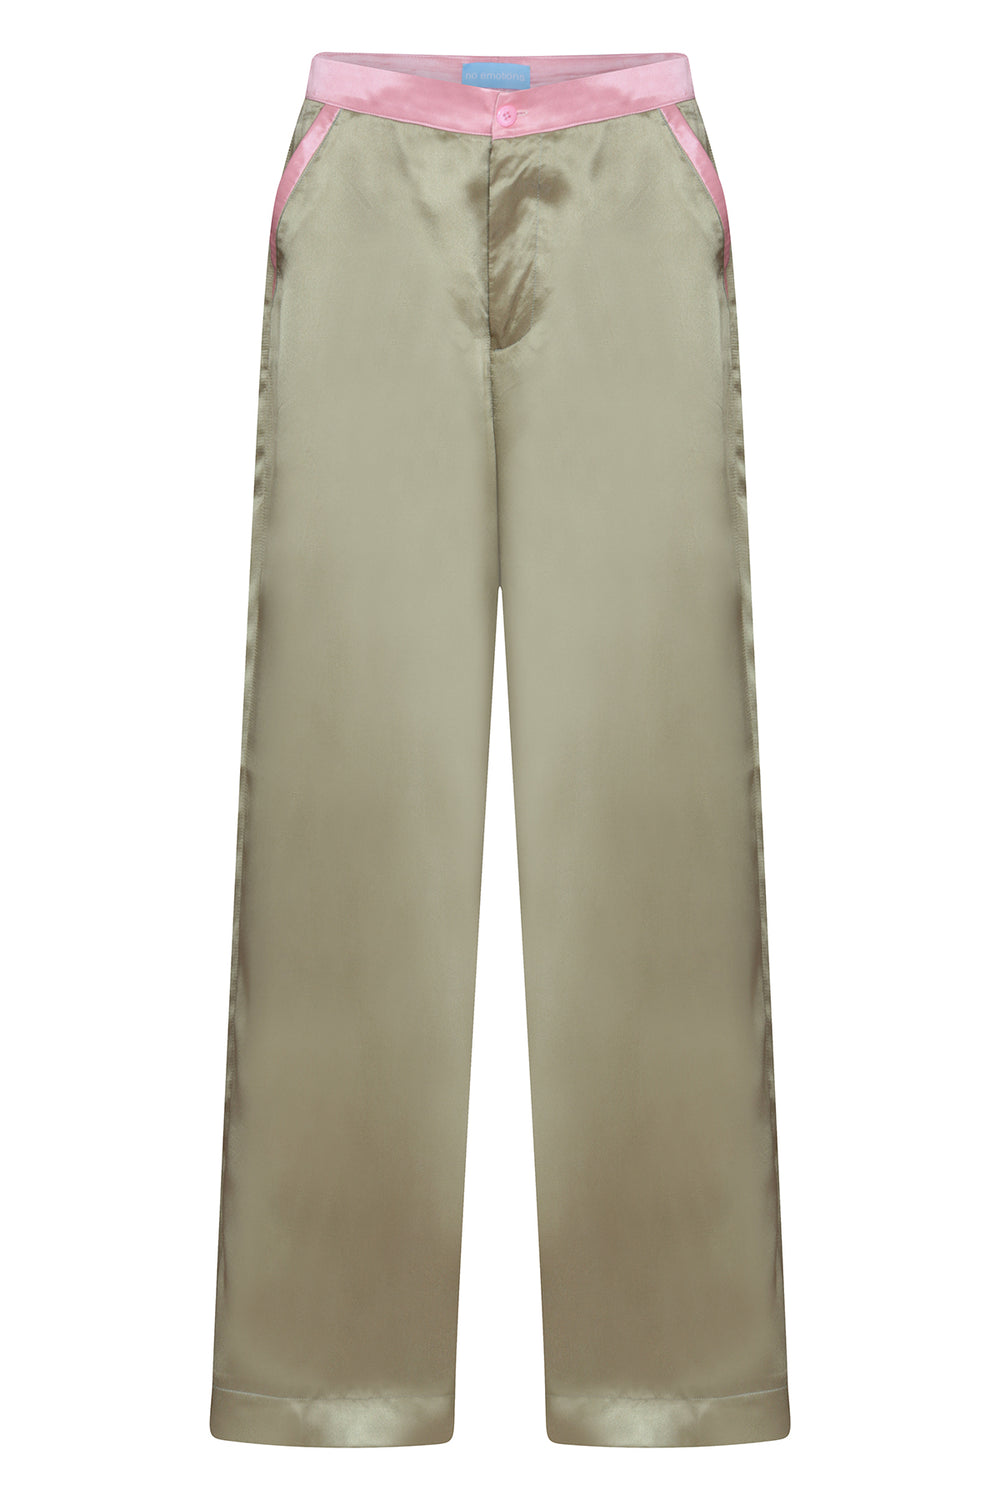 Olive wide-leg silk trousers with pale pink trims, worn in London